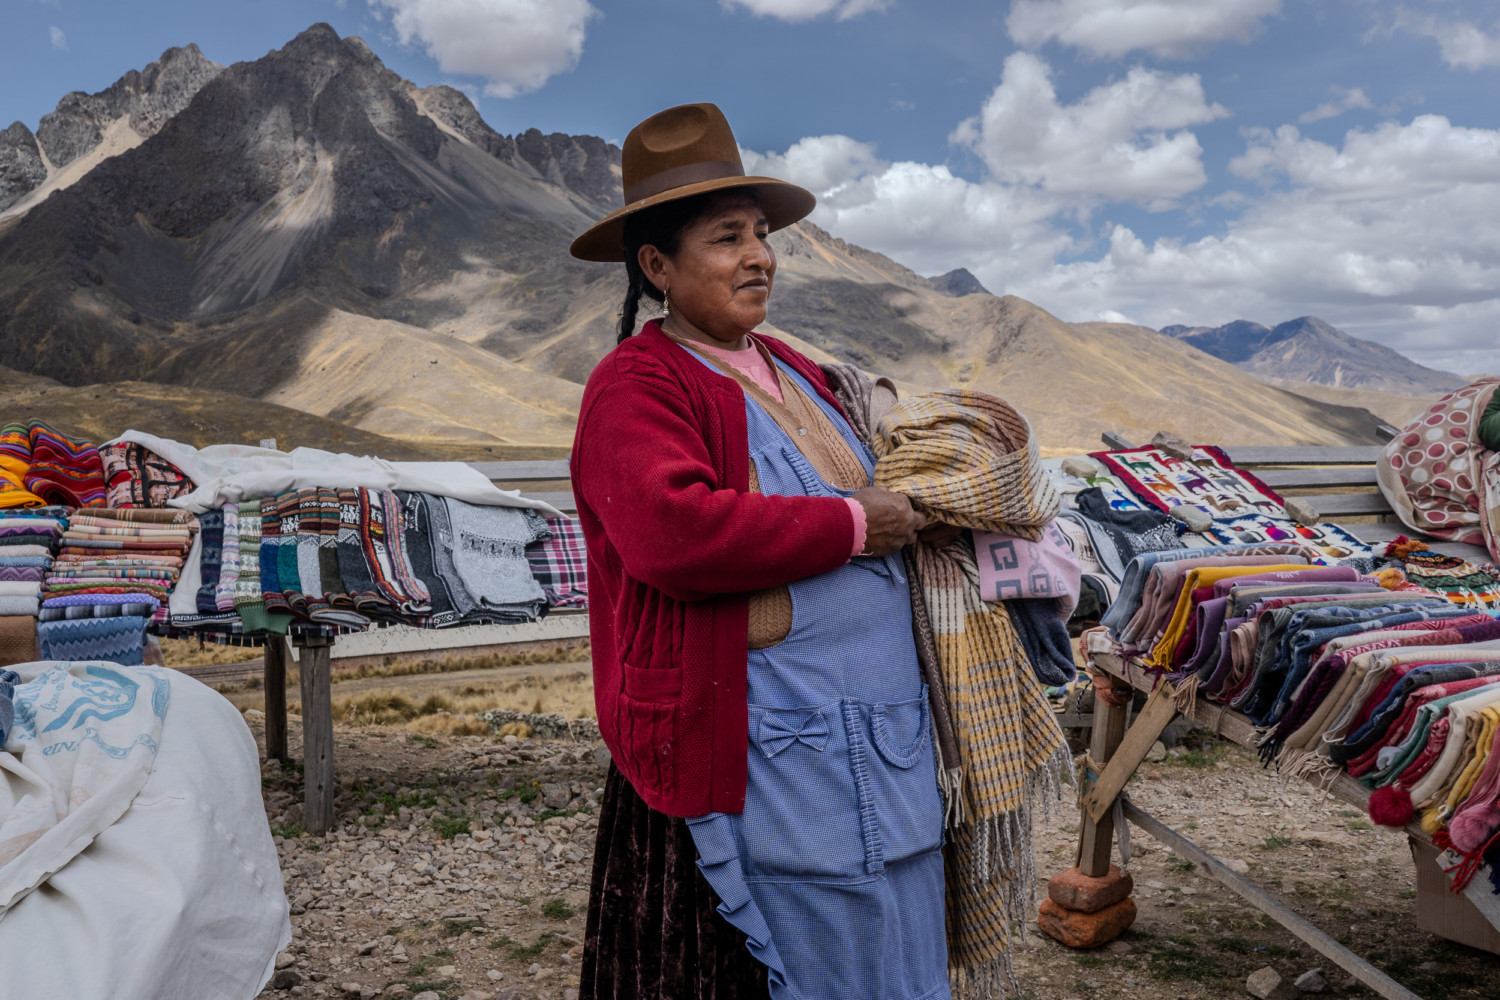 A woman in traditional clothing selling goods | Peru Photo Tour with raw.tours